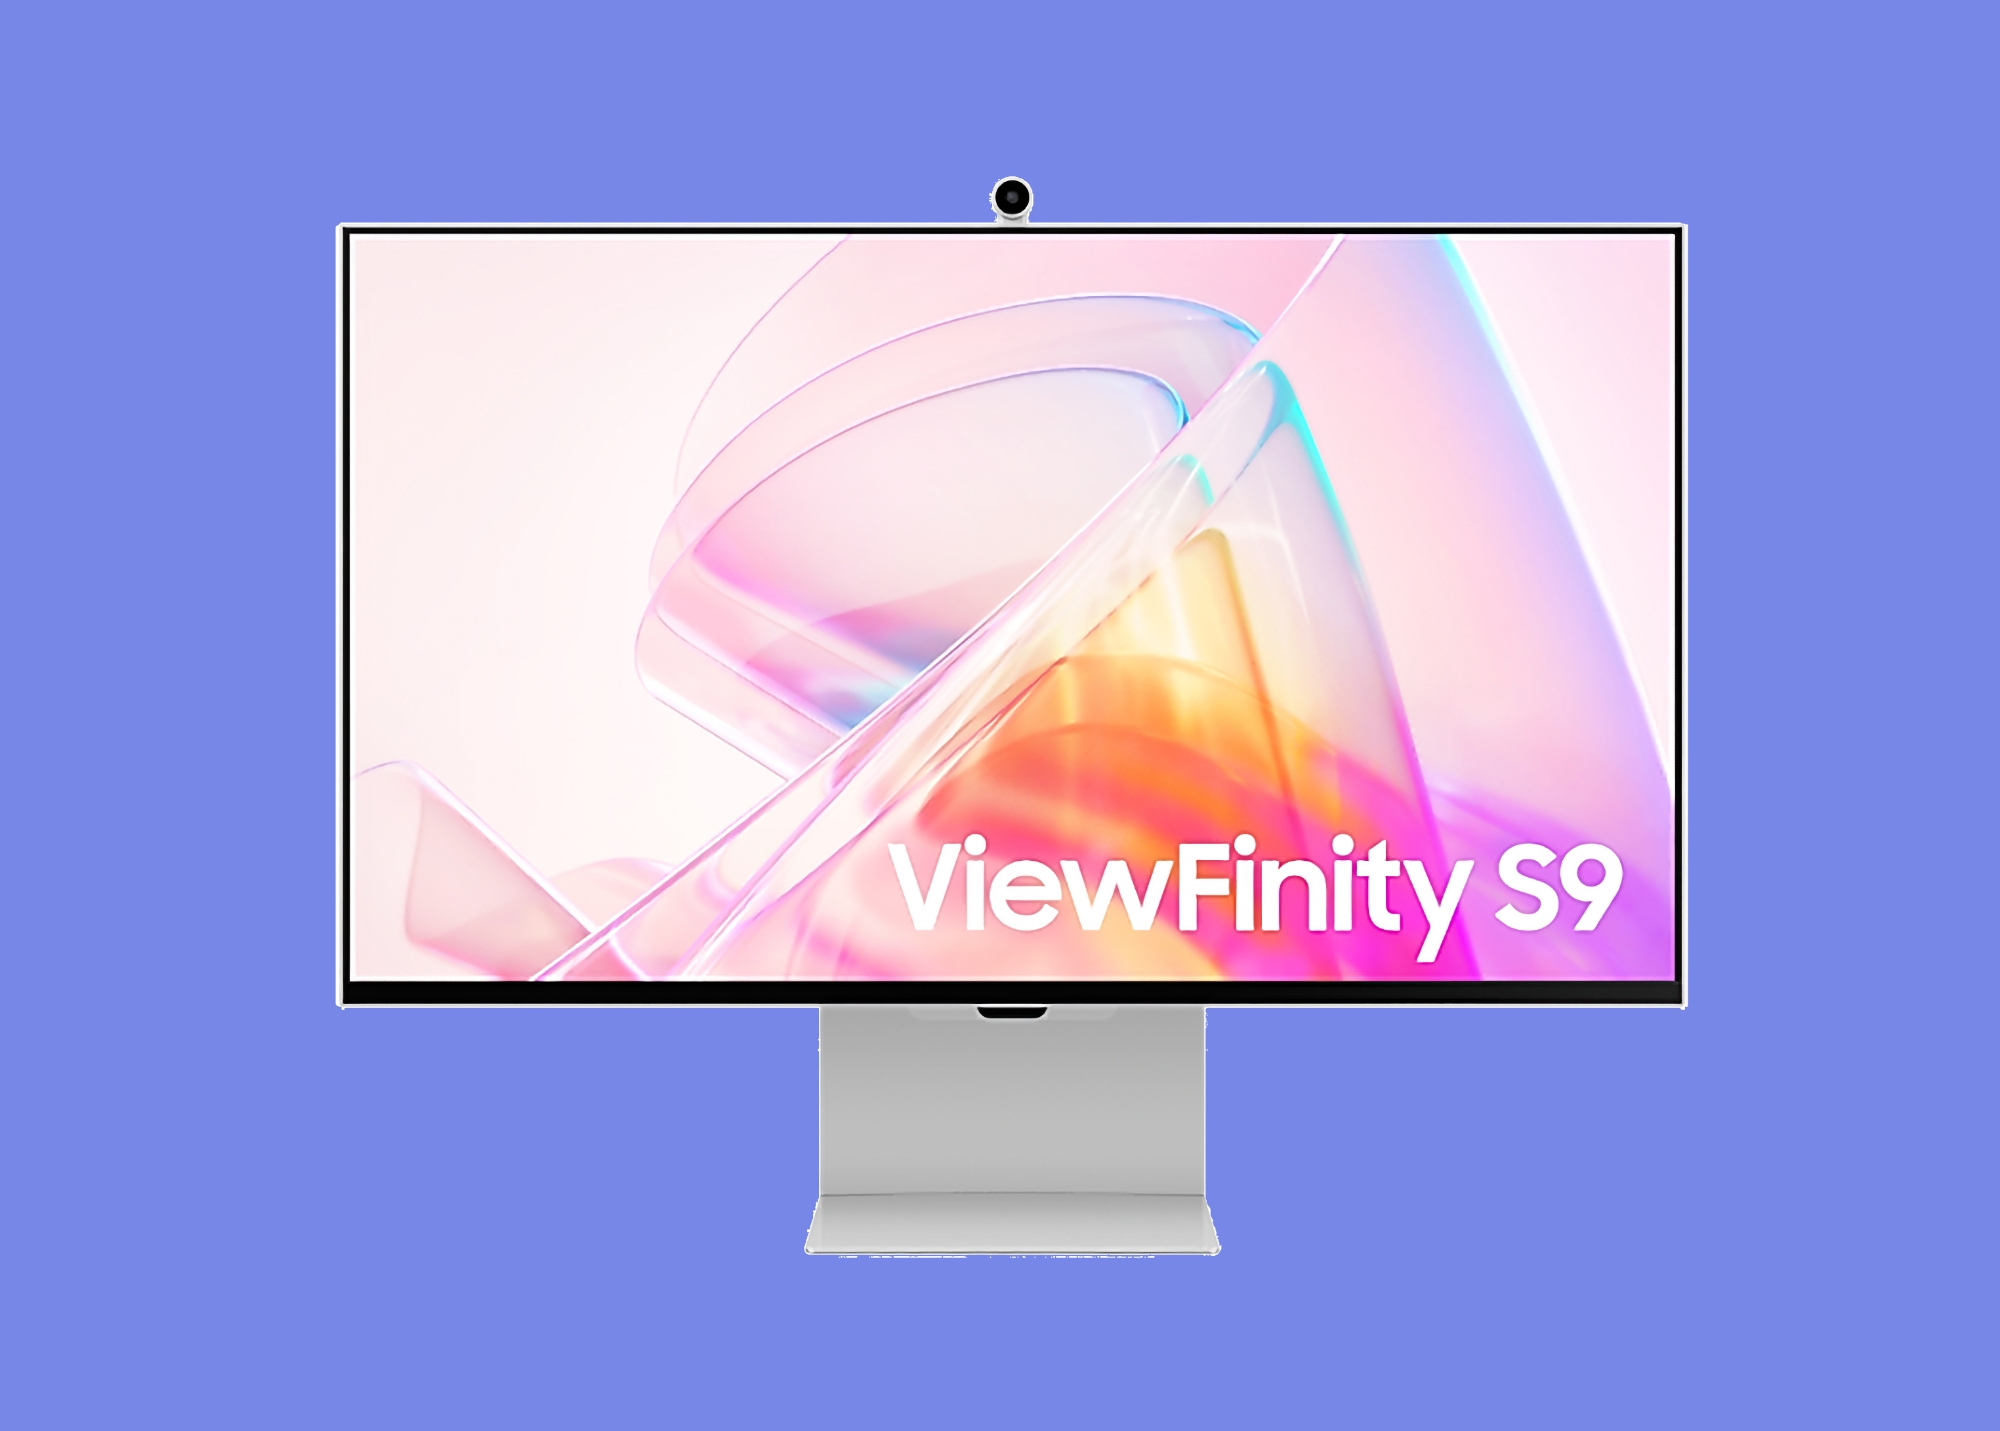 Discount $704: Samsung ViewFinity S9 with matte display, webcam and Tizen TV OS is available on Amazon at a promotional price 